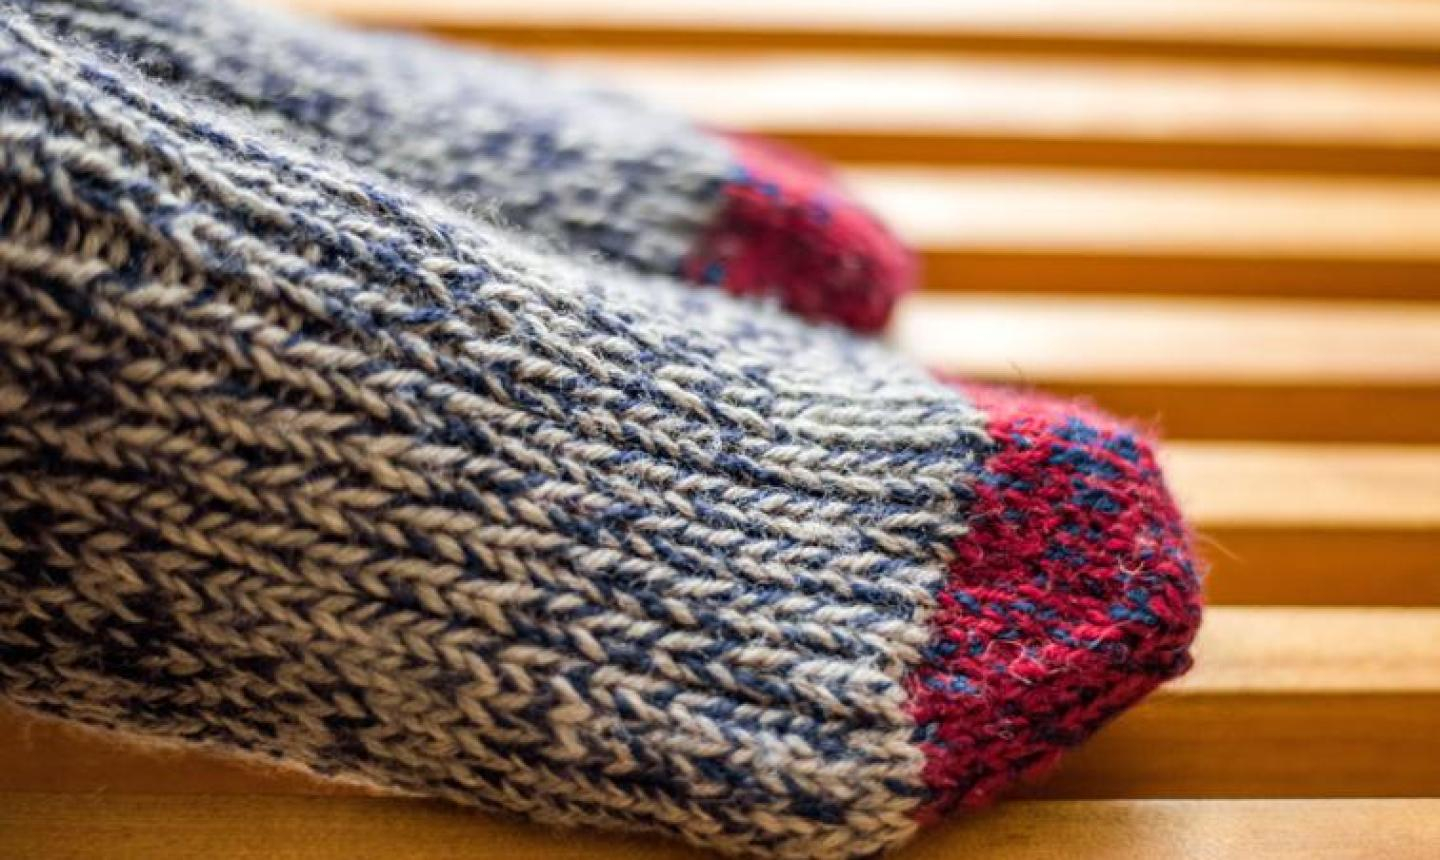 Knitting Socks On Circular Needles Pattern 7 Pro Tips For Sock Knitting Success Even If Its Your First Time